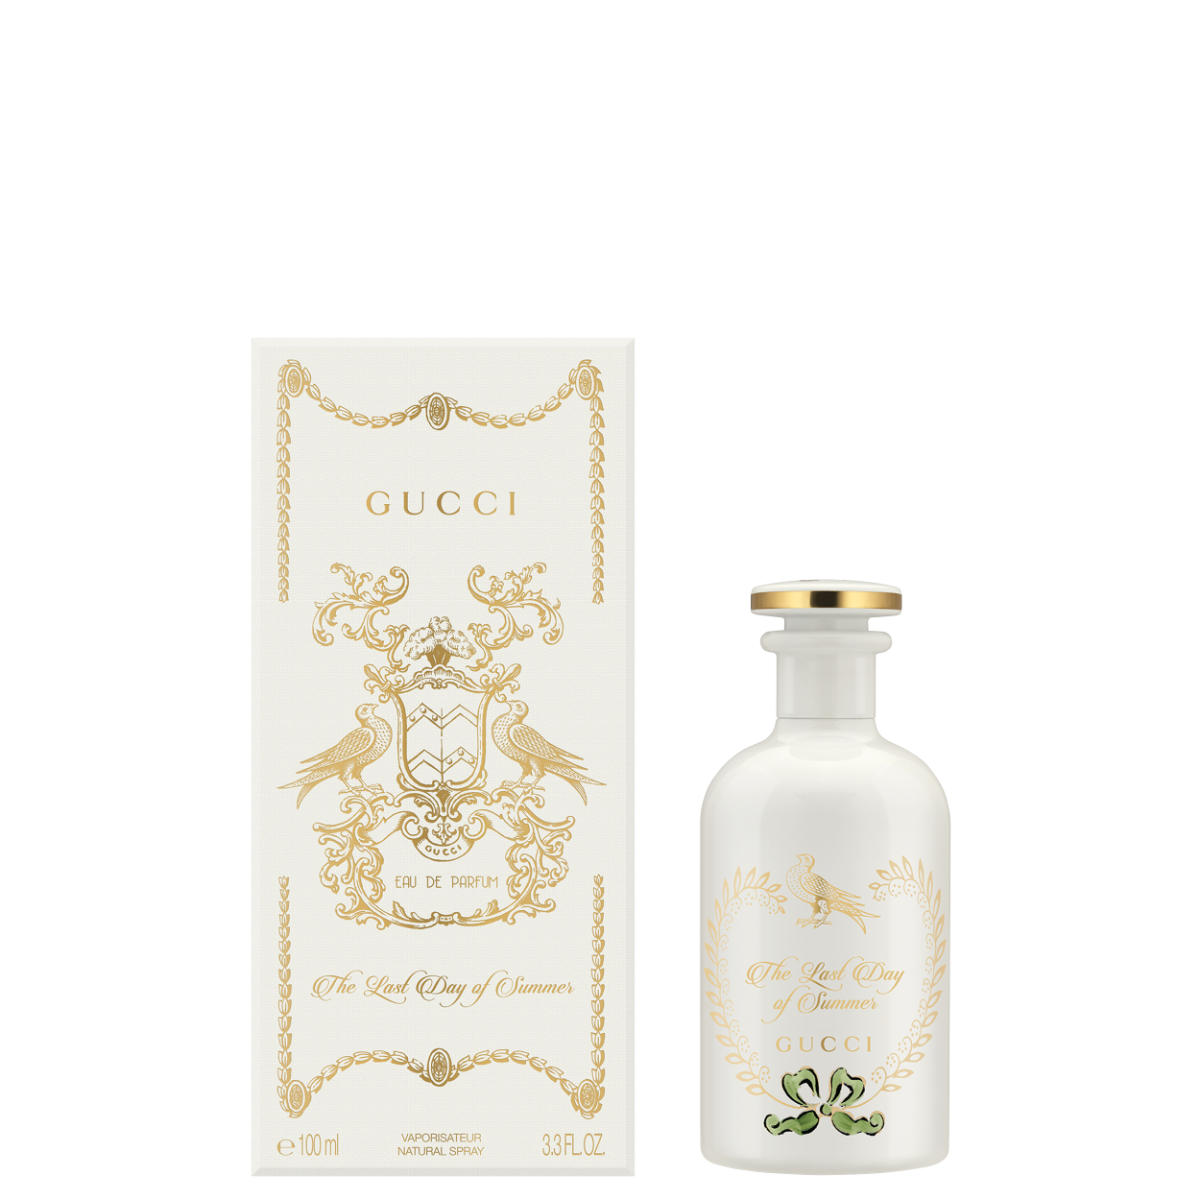 Gucci Introduces The Luxury Parfume Collection: The Alchemist’s Garden